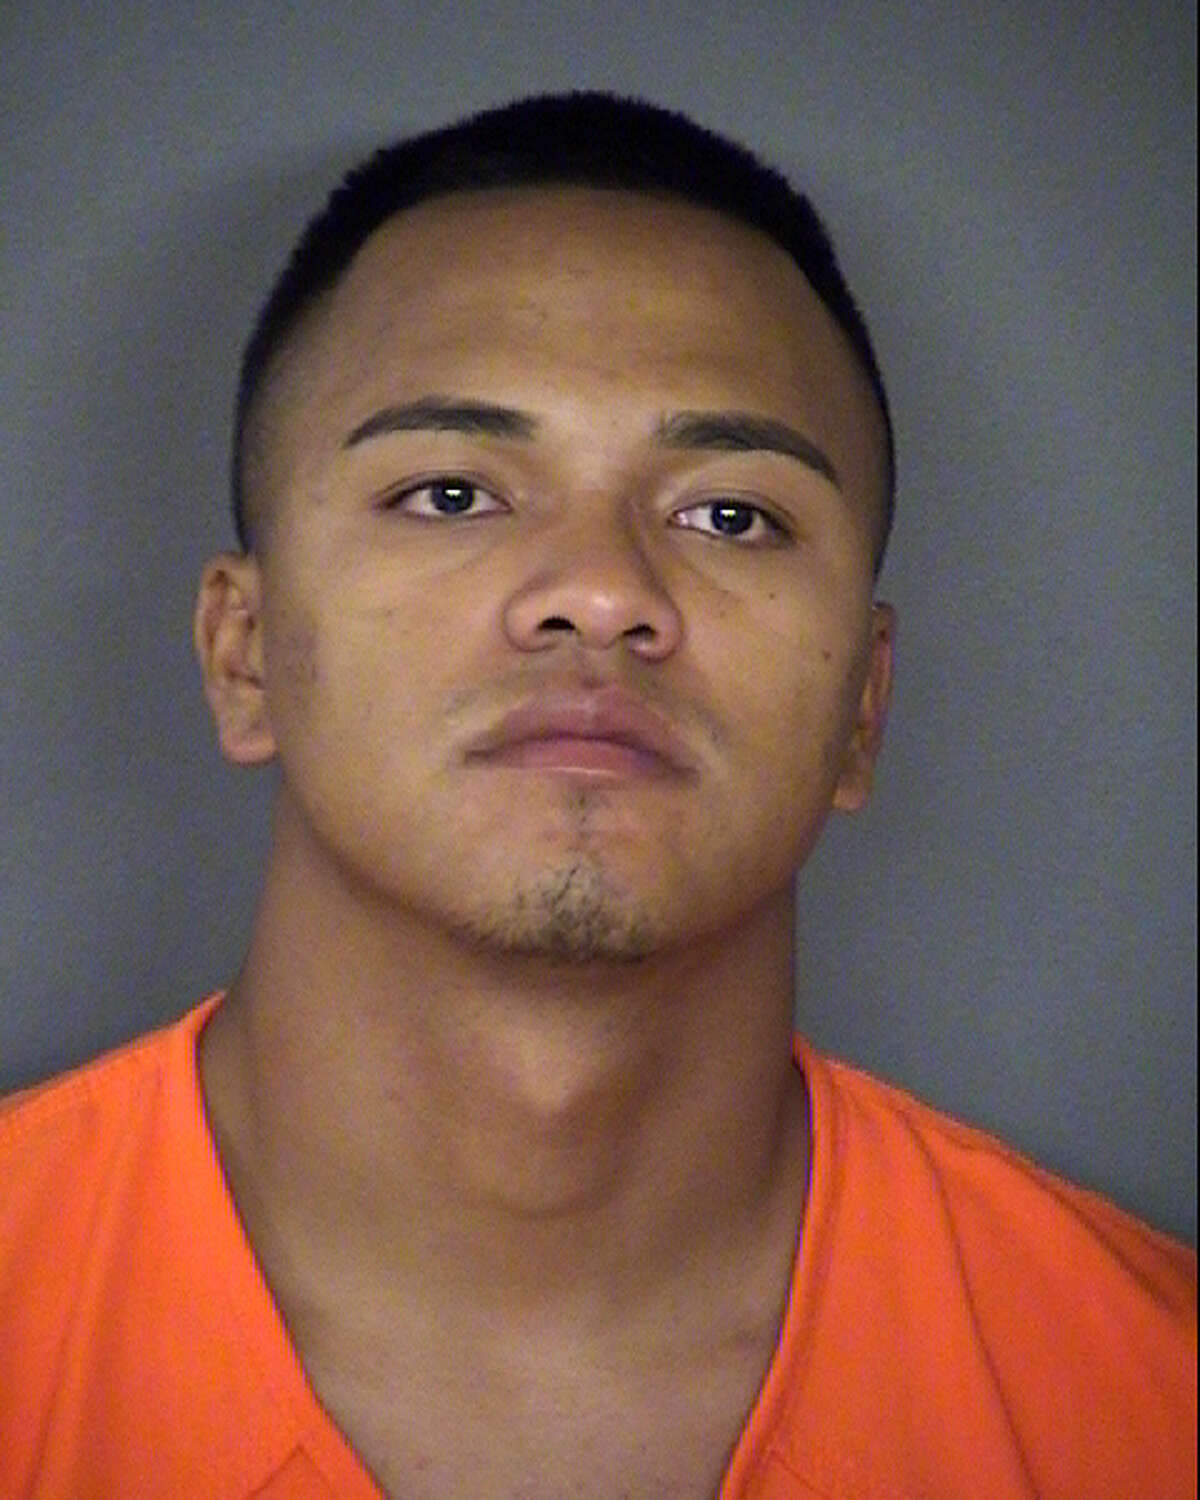 Adrian Romo, 20, of San Antonio, was arrested in September 2017 and is accused of sending nude images of a woman to family members of her husband after the victim and her husband reconciled after a separation. Romo now faces a charge of unlawful disclosure of intimate visual material and assault causing bodily injury.